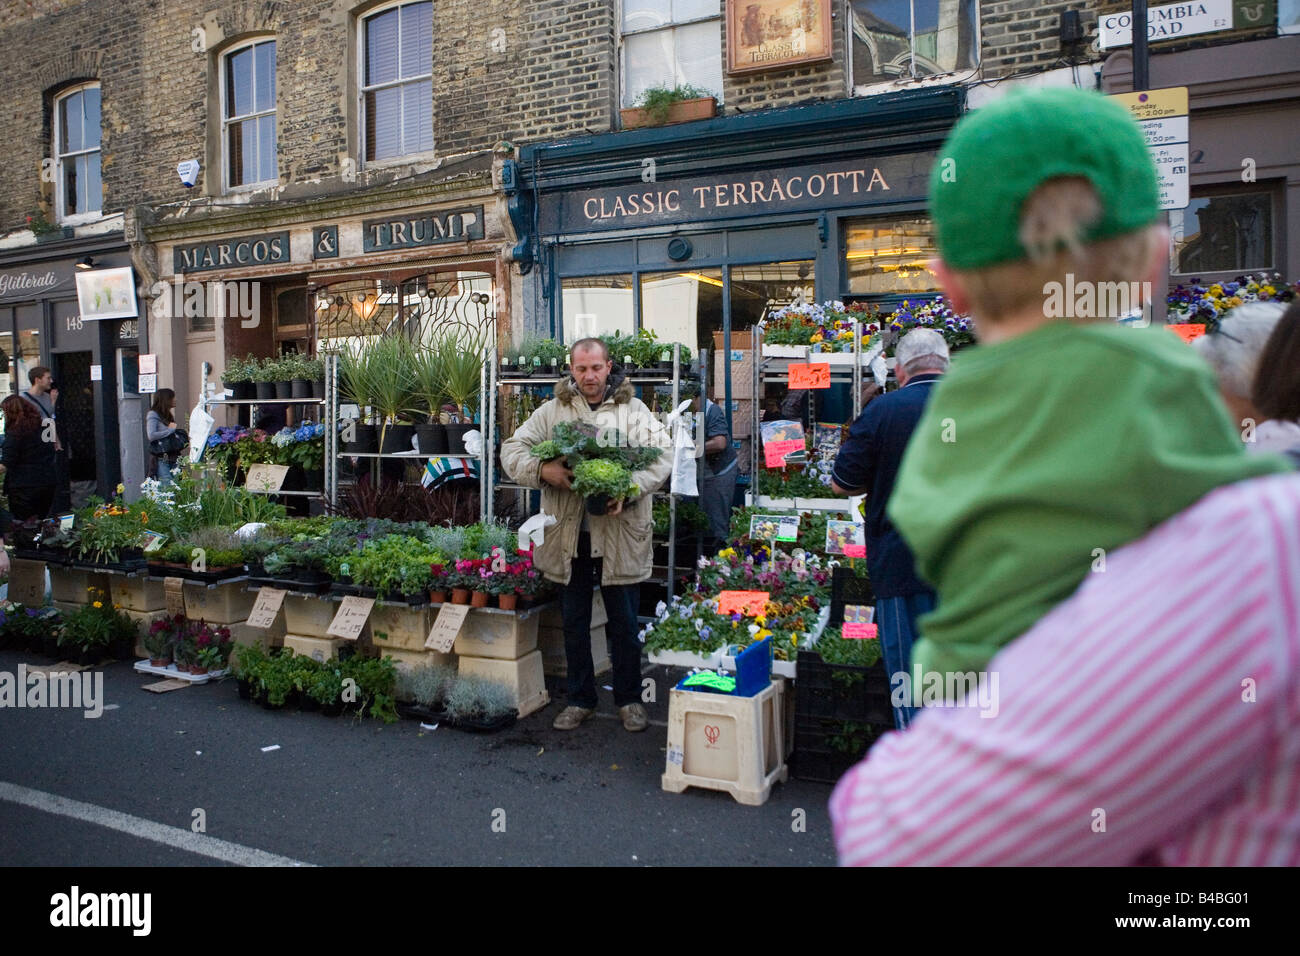 Colombia Rd flower market Stock Photo